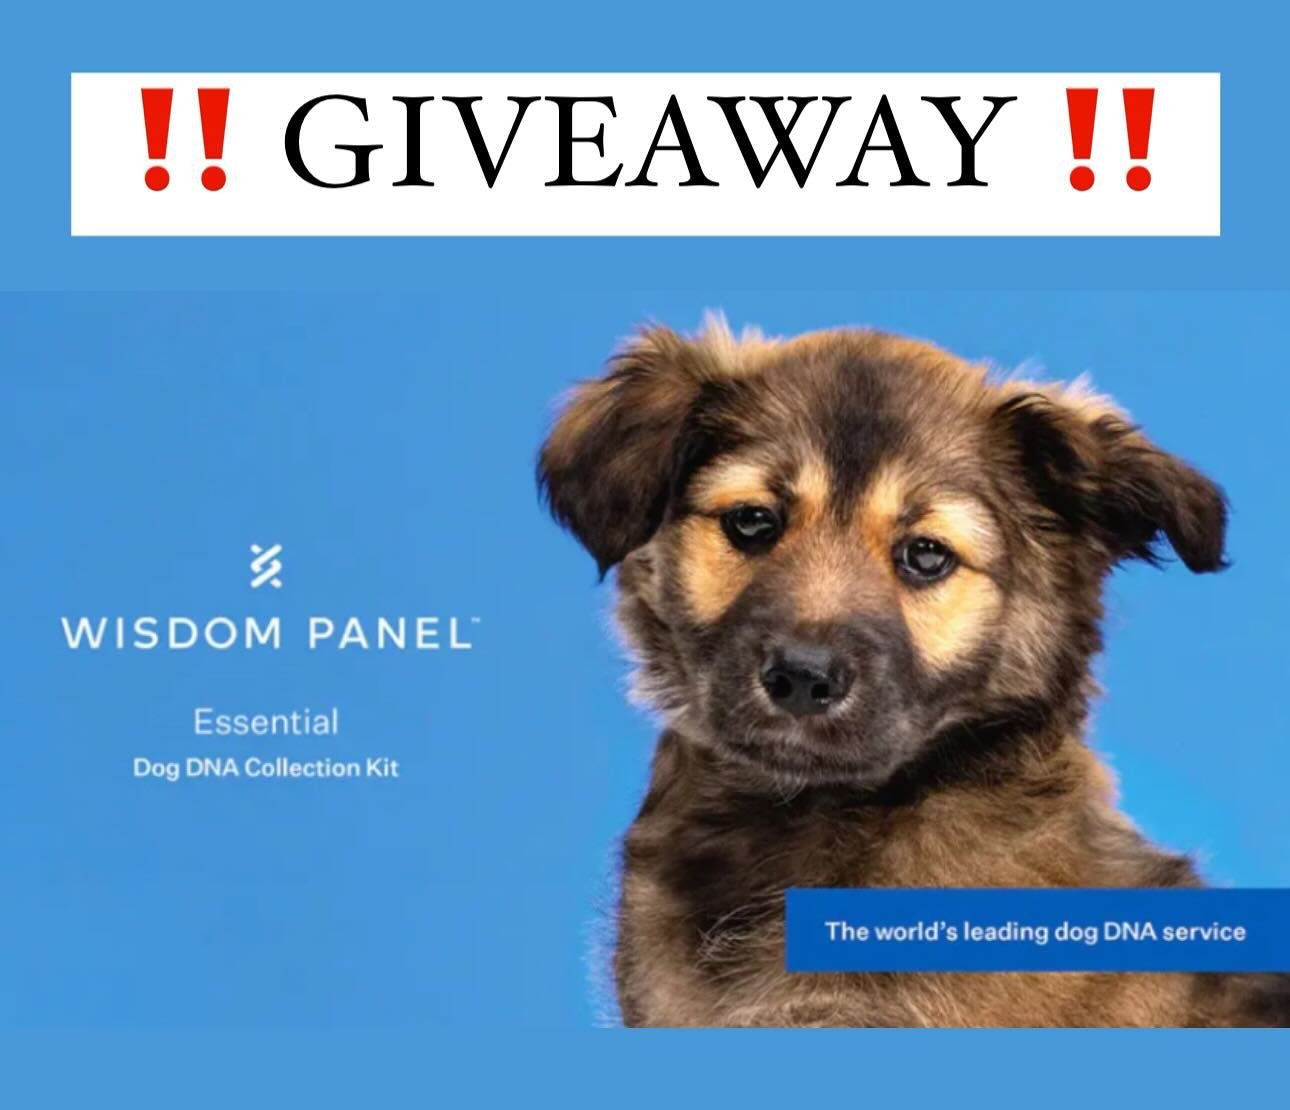 ‼️ GIVEAWAY ‼️

Are you curious or want to know what breed your furry best friend is?!?!

Enter to win a FREE @wisdompanel DNA test for your pup!!! 🐕

To Enter:

🐶 Follow @southerntailsforpreciouspaws

🐶 Like this post!

🐶 Tag a friend! (Each add